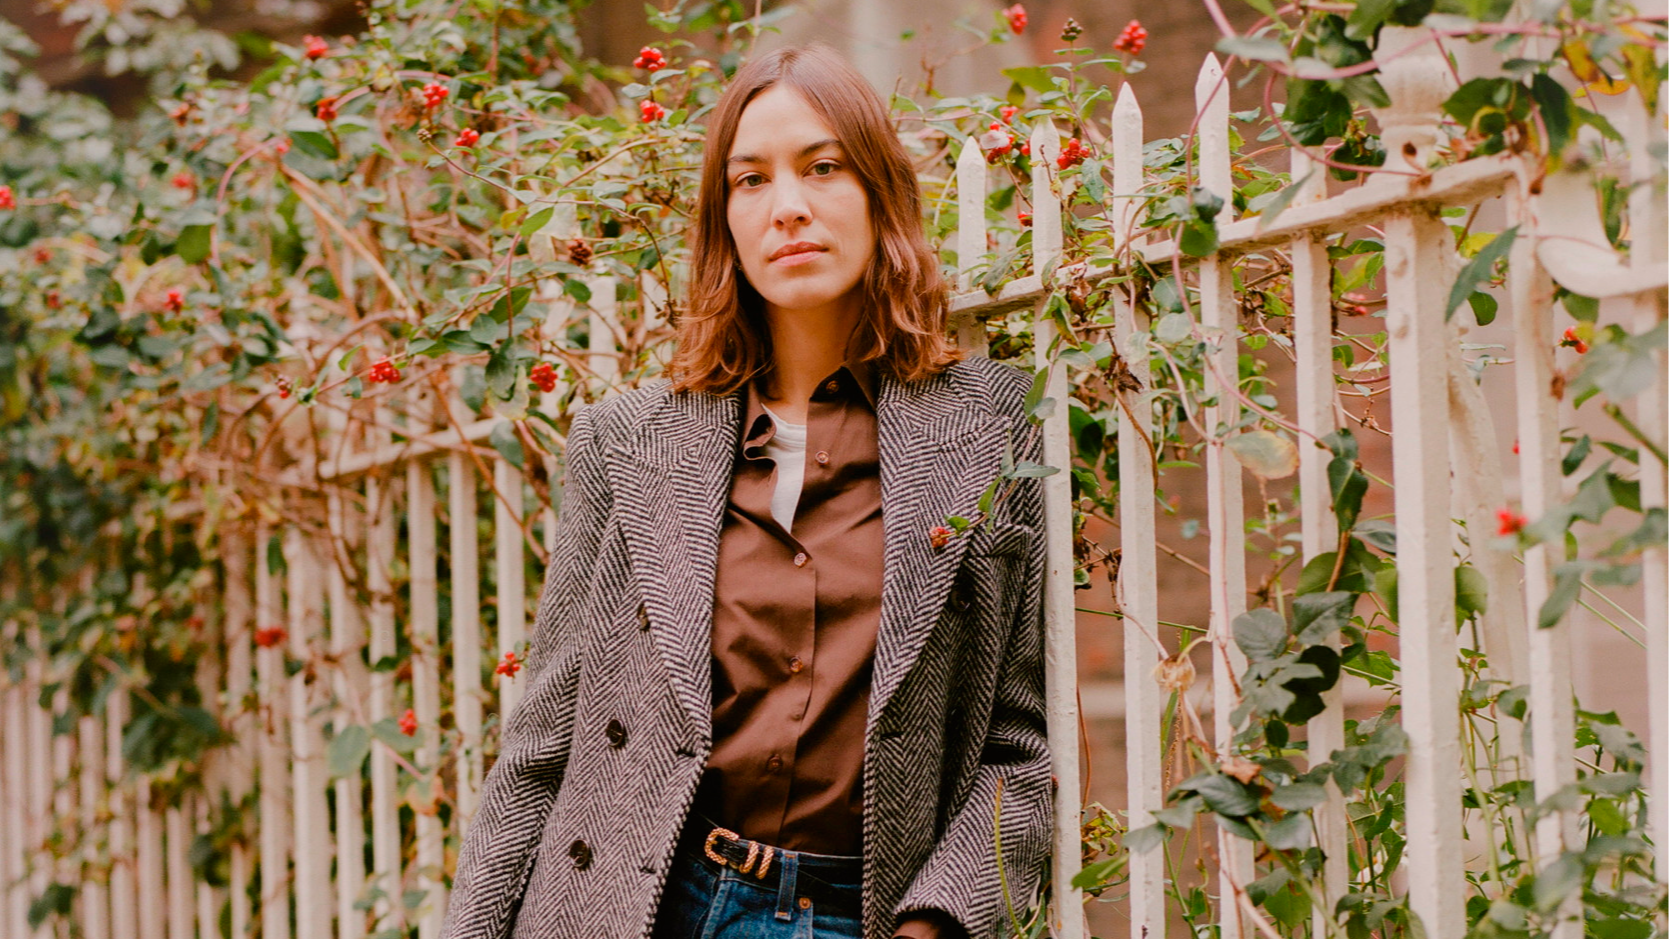 Alexa Chung: how I found my personal style